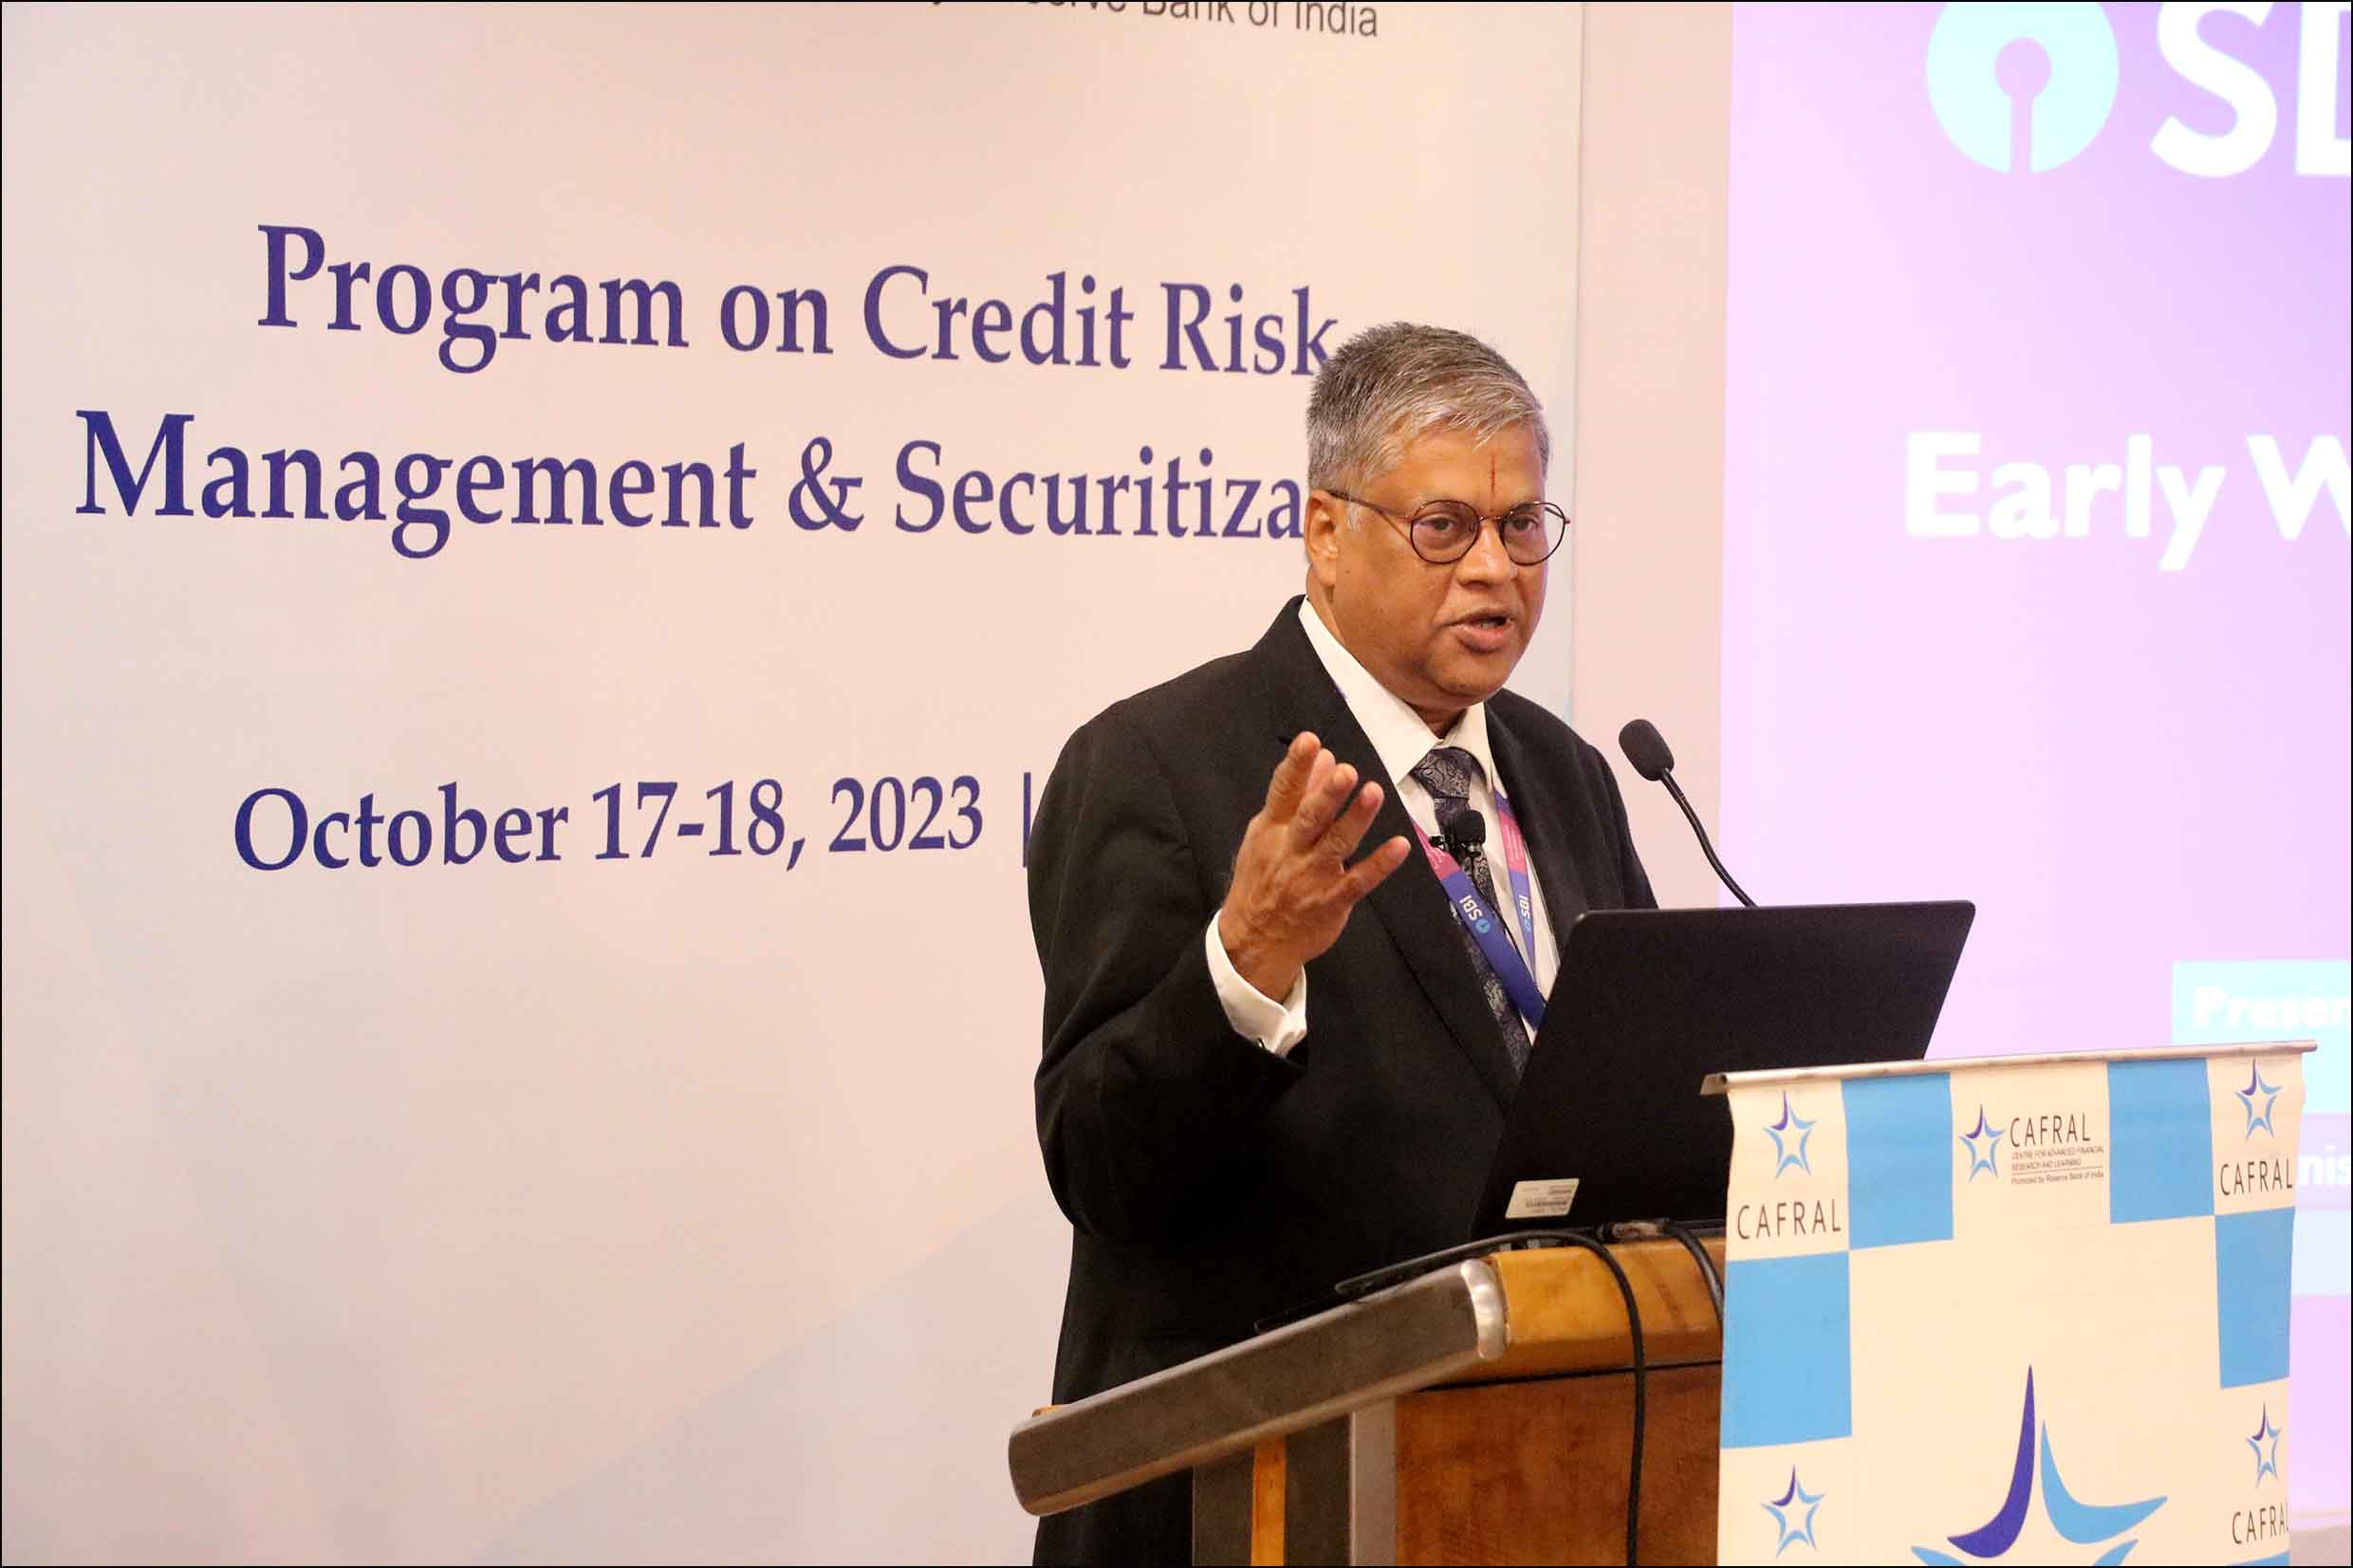 Sampath Kumar, Chief General Manager, State Bank of India